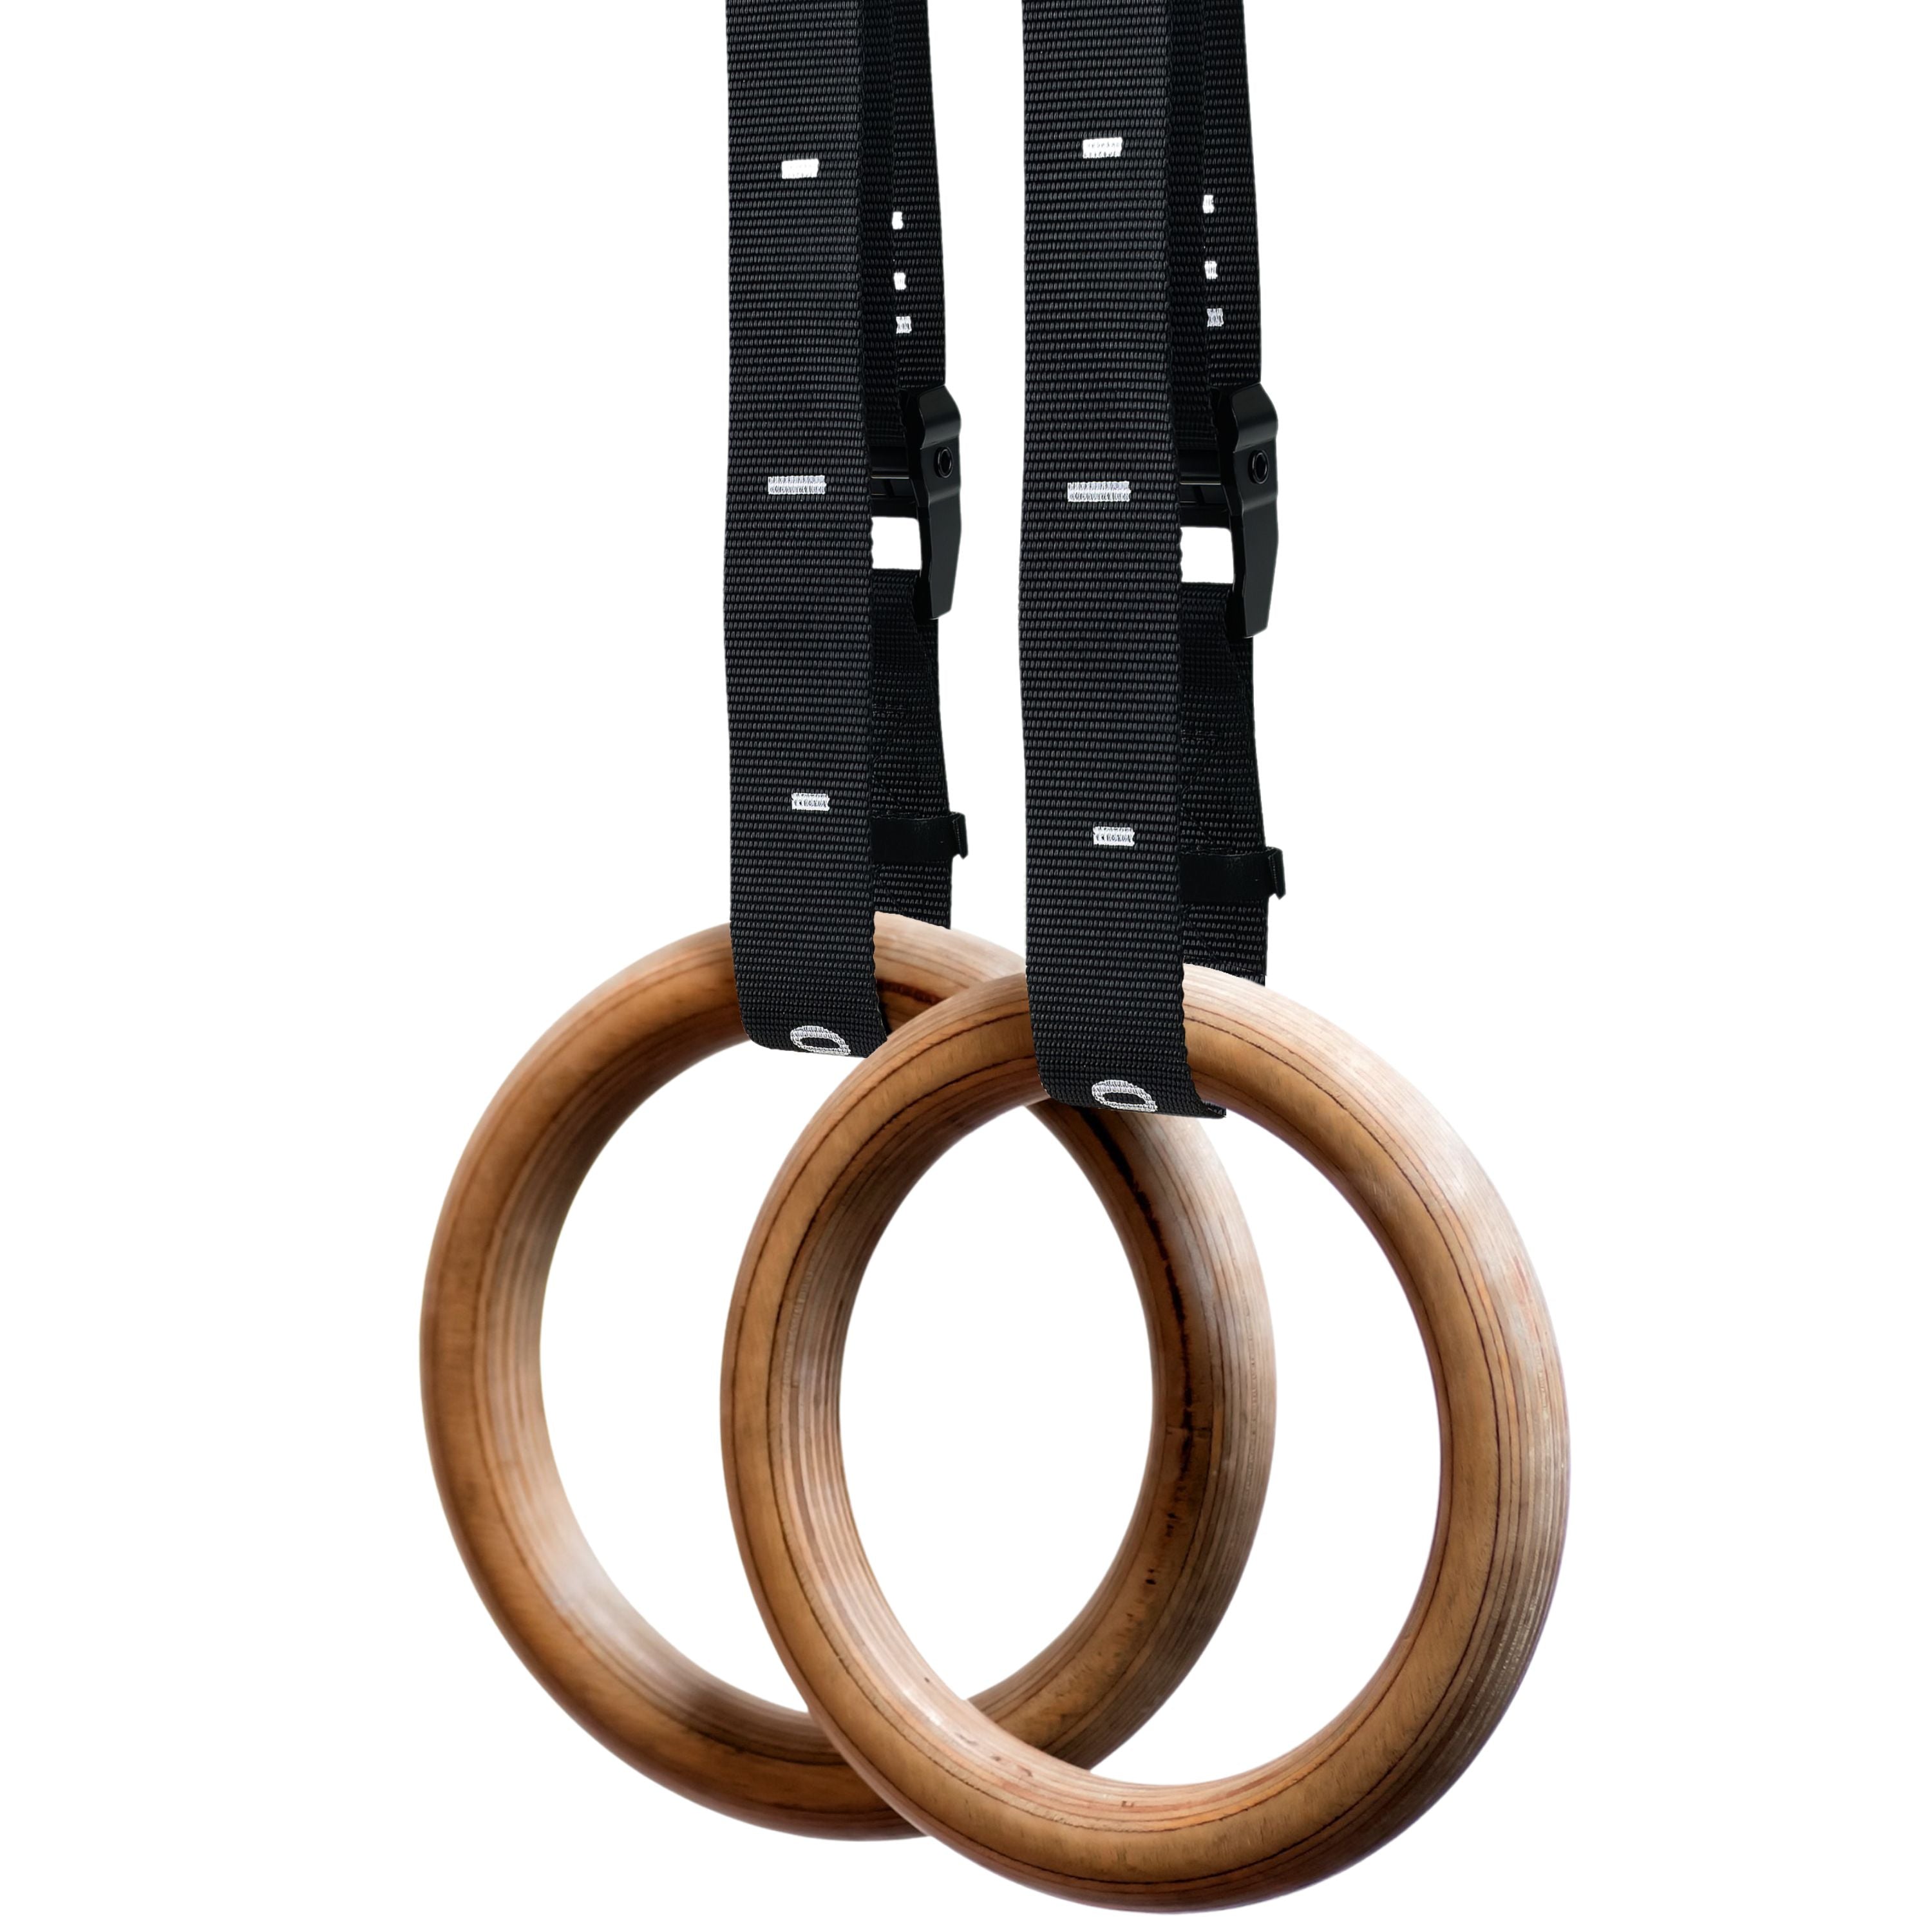 Atomic Iron calisthenics rings with numbered adjustable straps